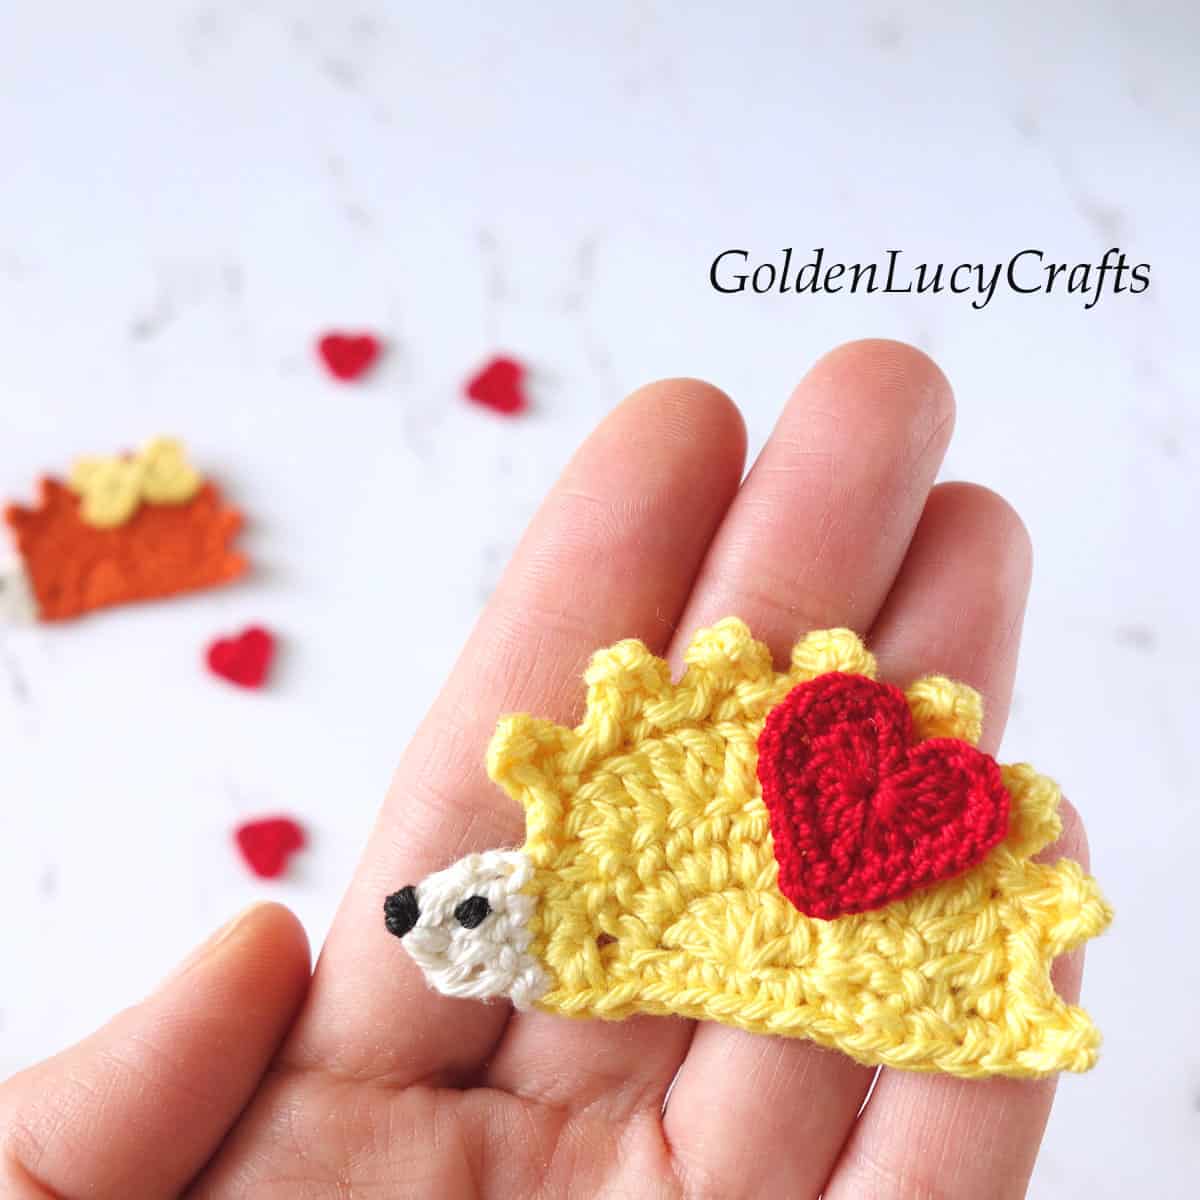 Crochet hedgehog applique in the palm of a hand.